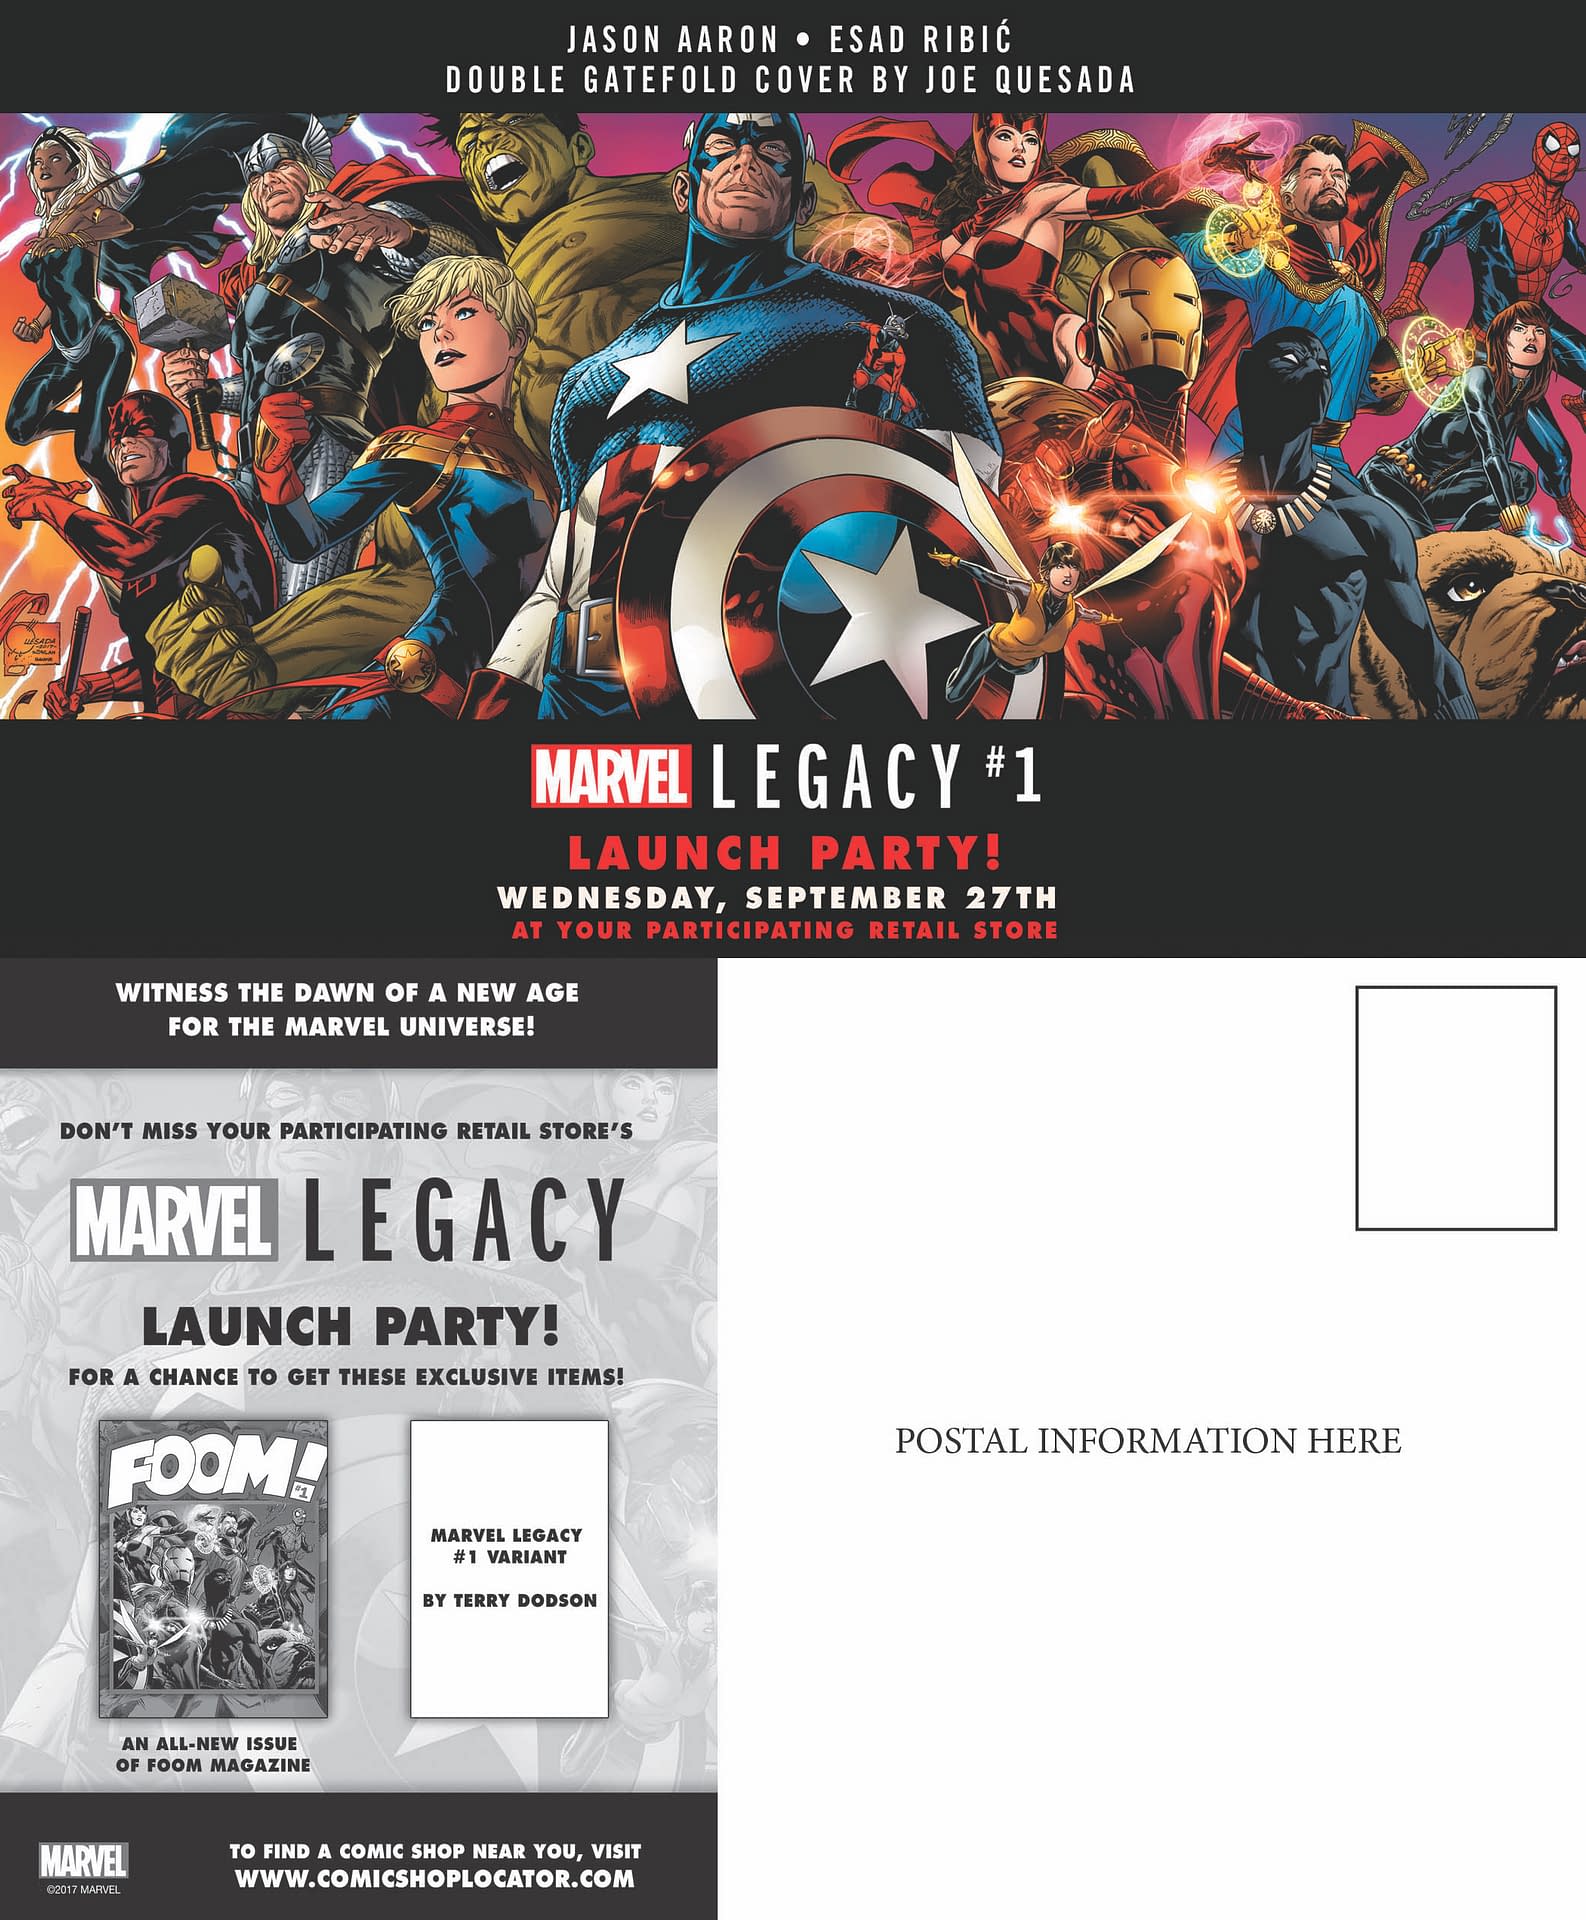 Ain't No Party Like A Marvel Legacy Party, 'Cause A Marvel Legacy Party Don't Stop